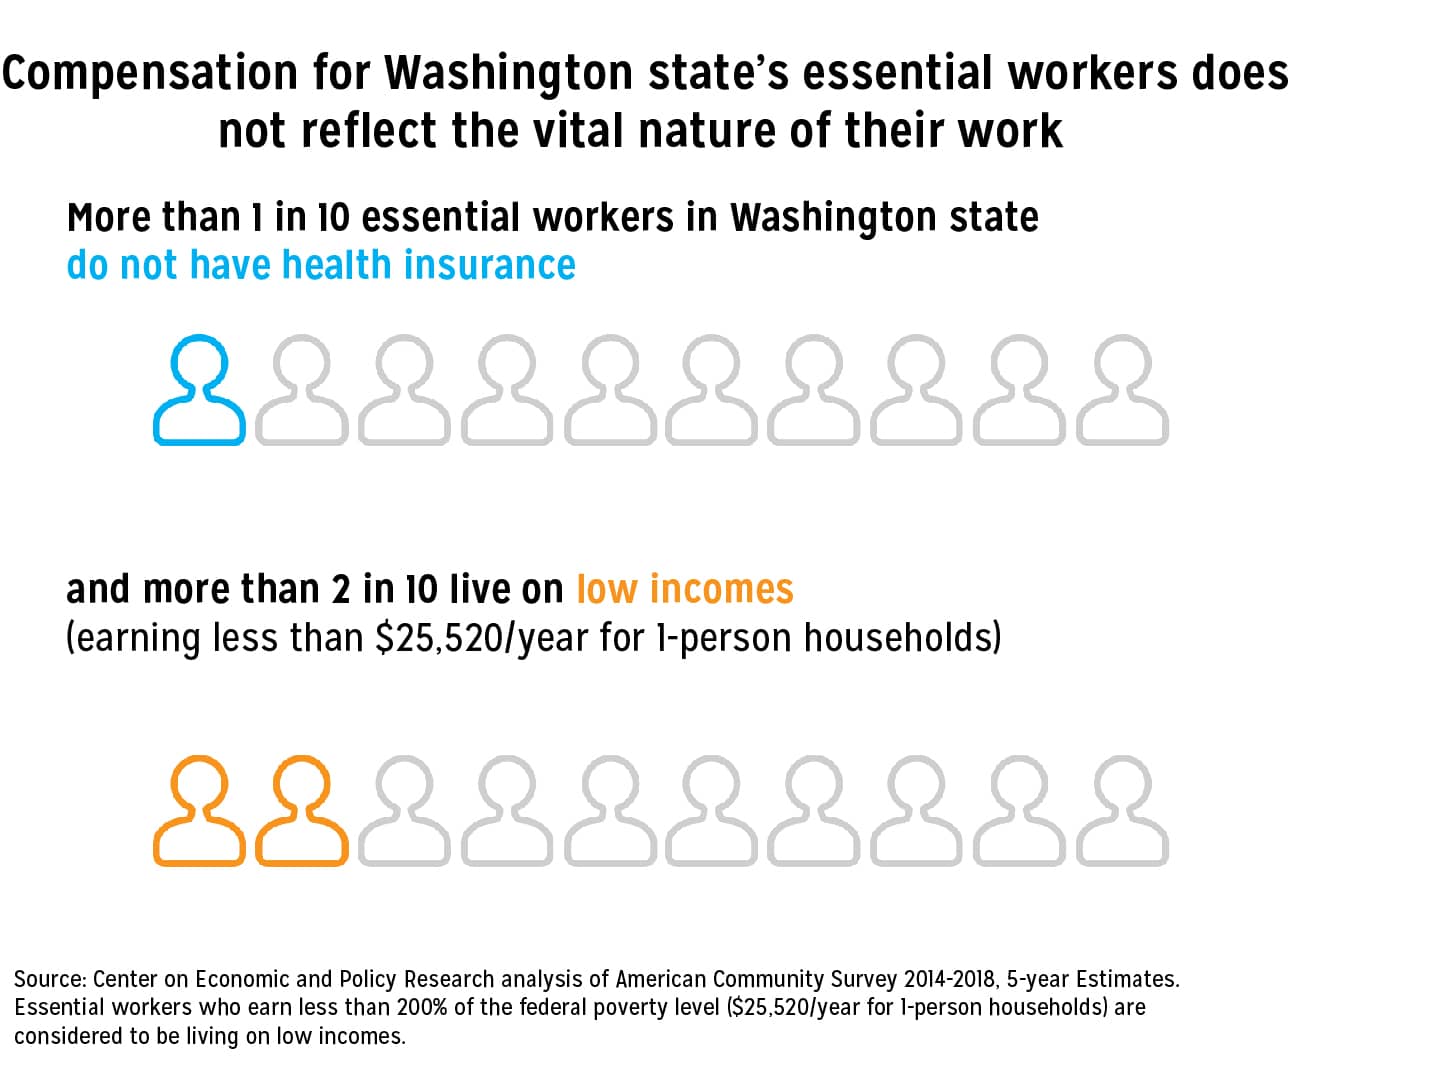 Infographic that shows that more than 1 in 10 essential workers in Washington state do not have health insurance, and more than 2 in 10 live on low incomes. 